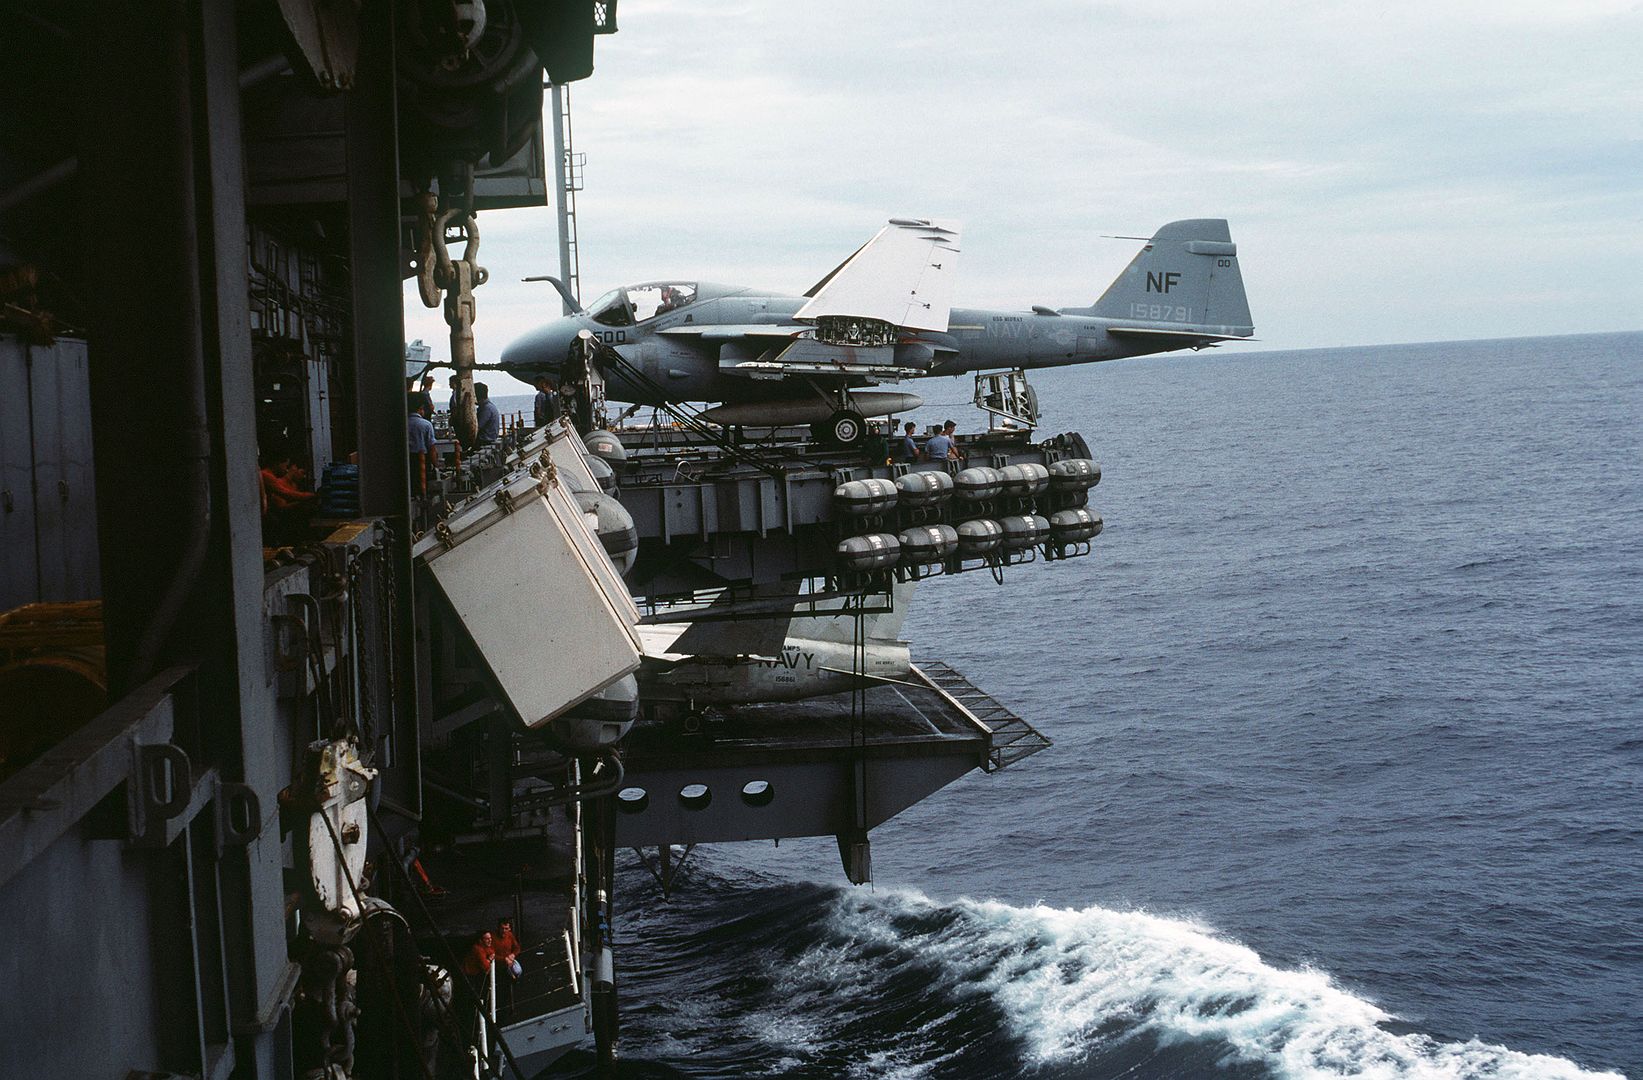 A Left Side View Of An A 6 Intruder Aircraft On The Flight Deck Of The Aircraft Carrier USS MIDWAY